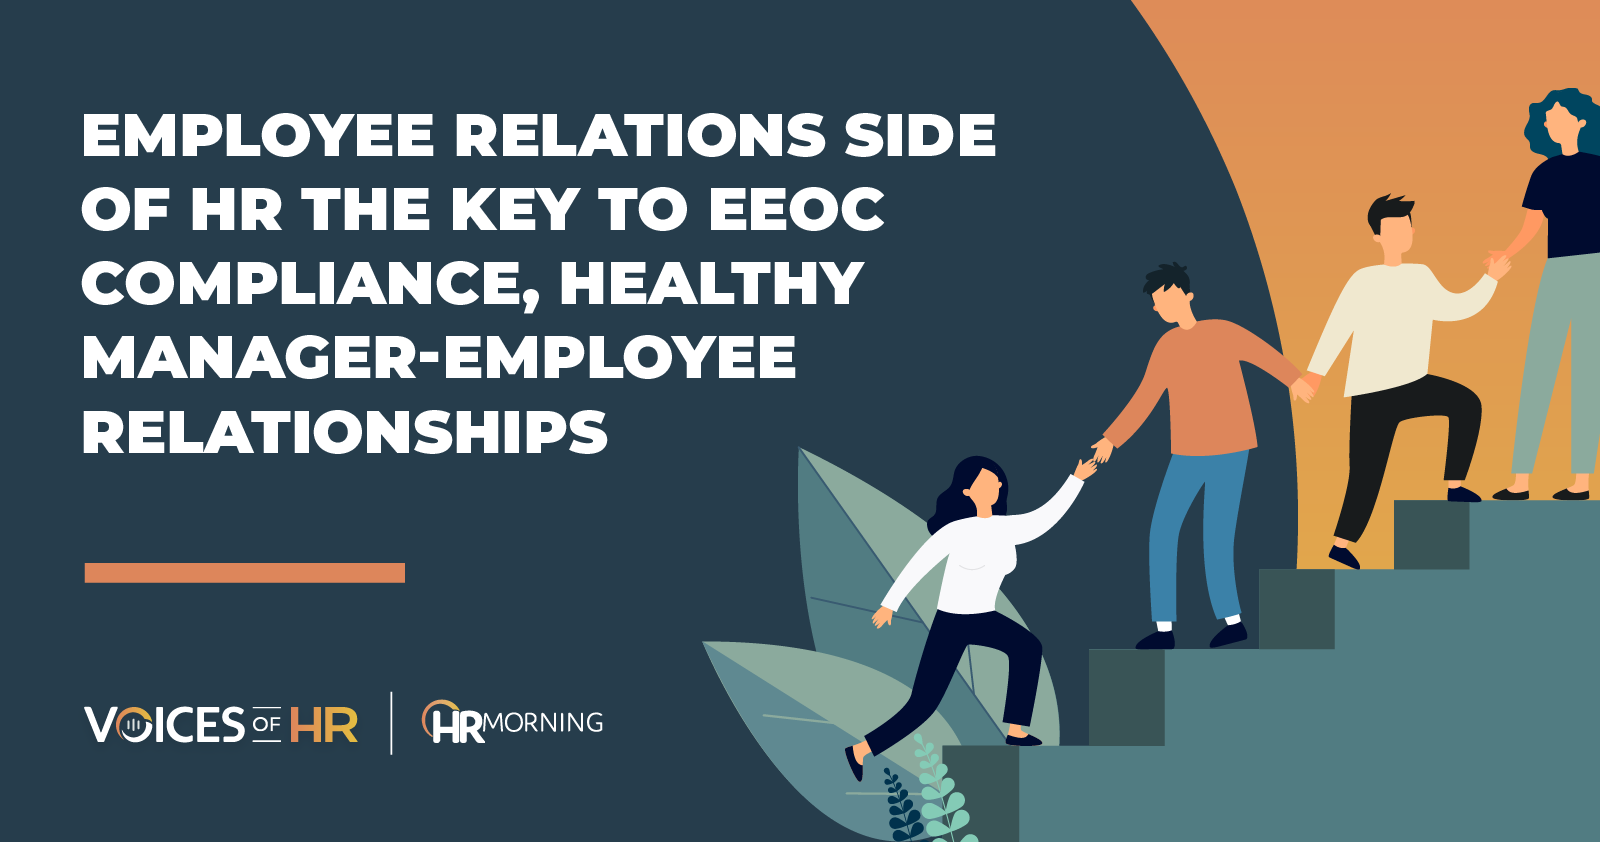 Employee relations side of HR the key to EEOC compliance, healthy manager-employee relationships